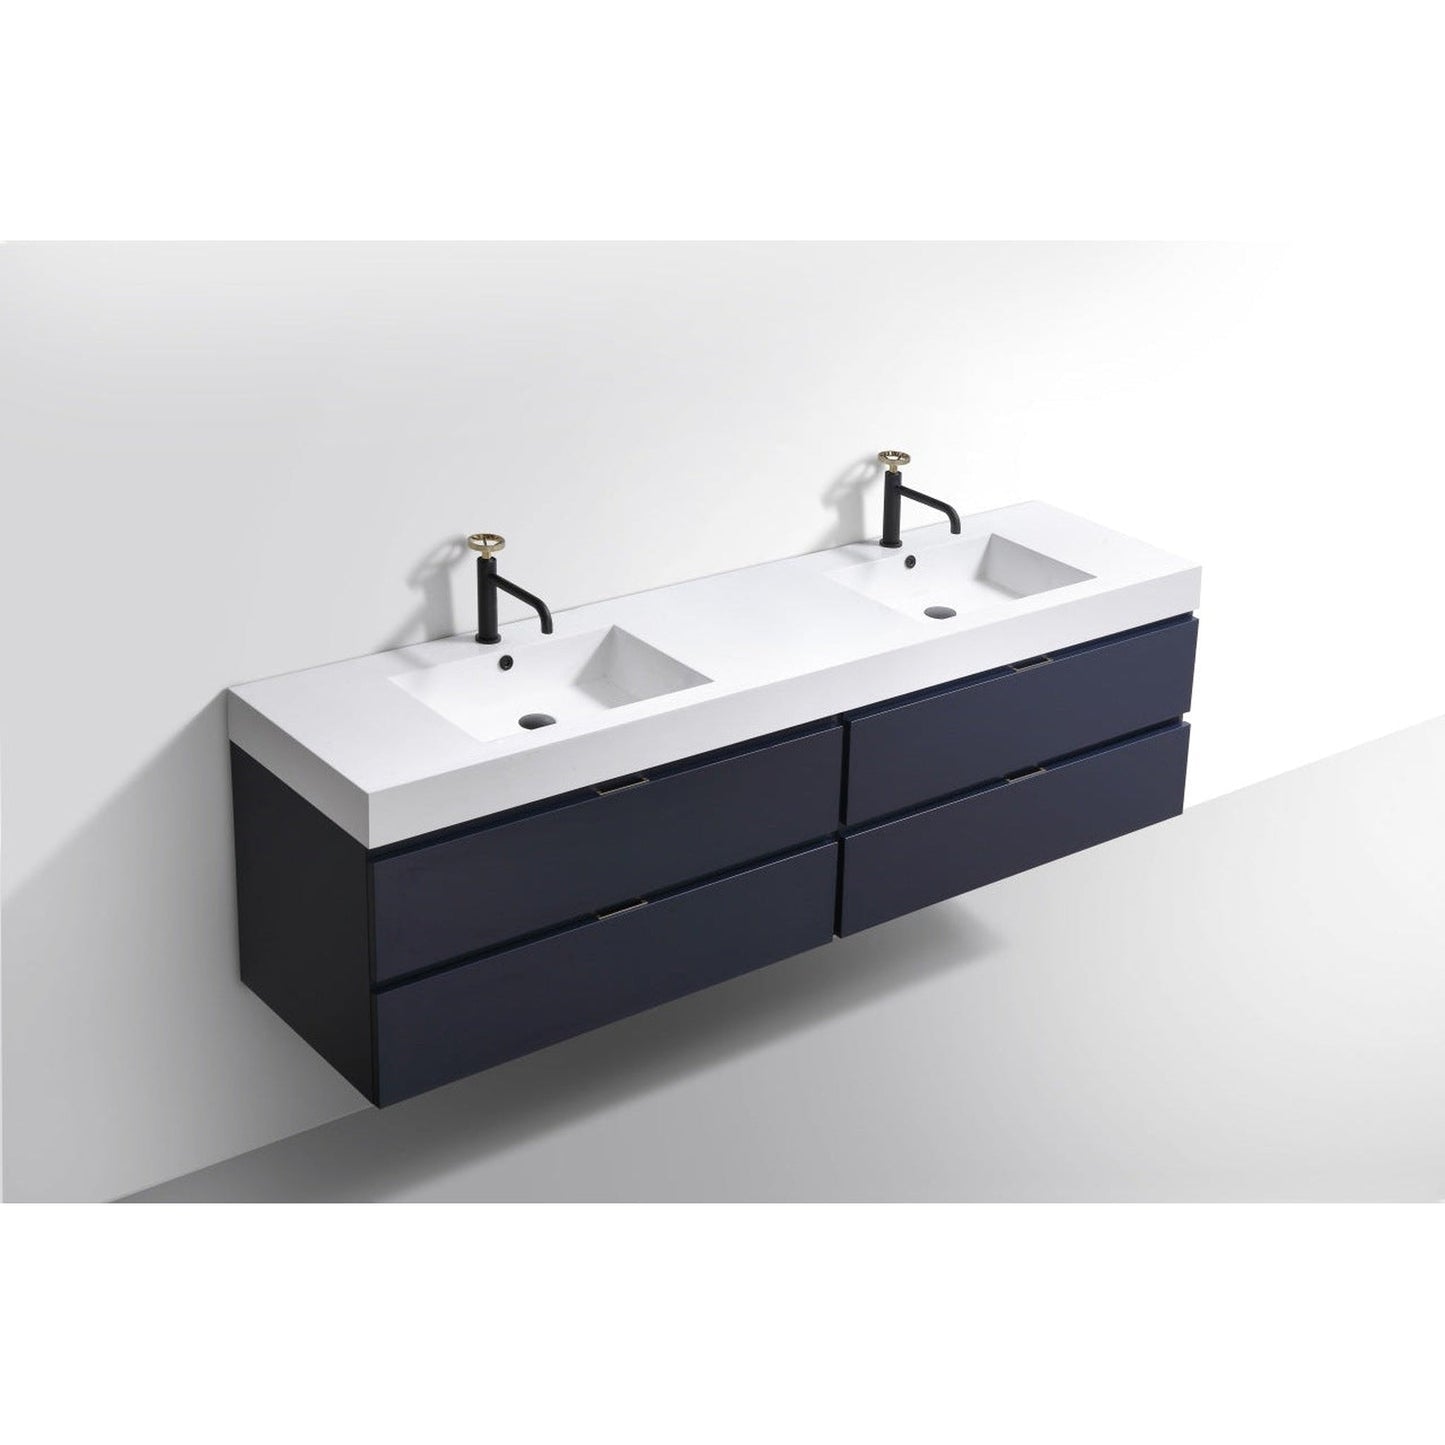 KubeBath Bliss 72" Blue Wall-Mounted Modern Bathroom Vanity With Double Integrated Acrylic Sink With Overflow and 24" White Framed Two Mirrors With Shelf